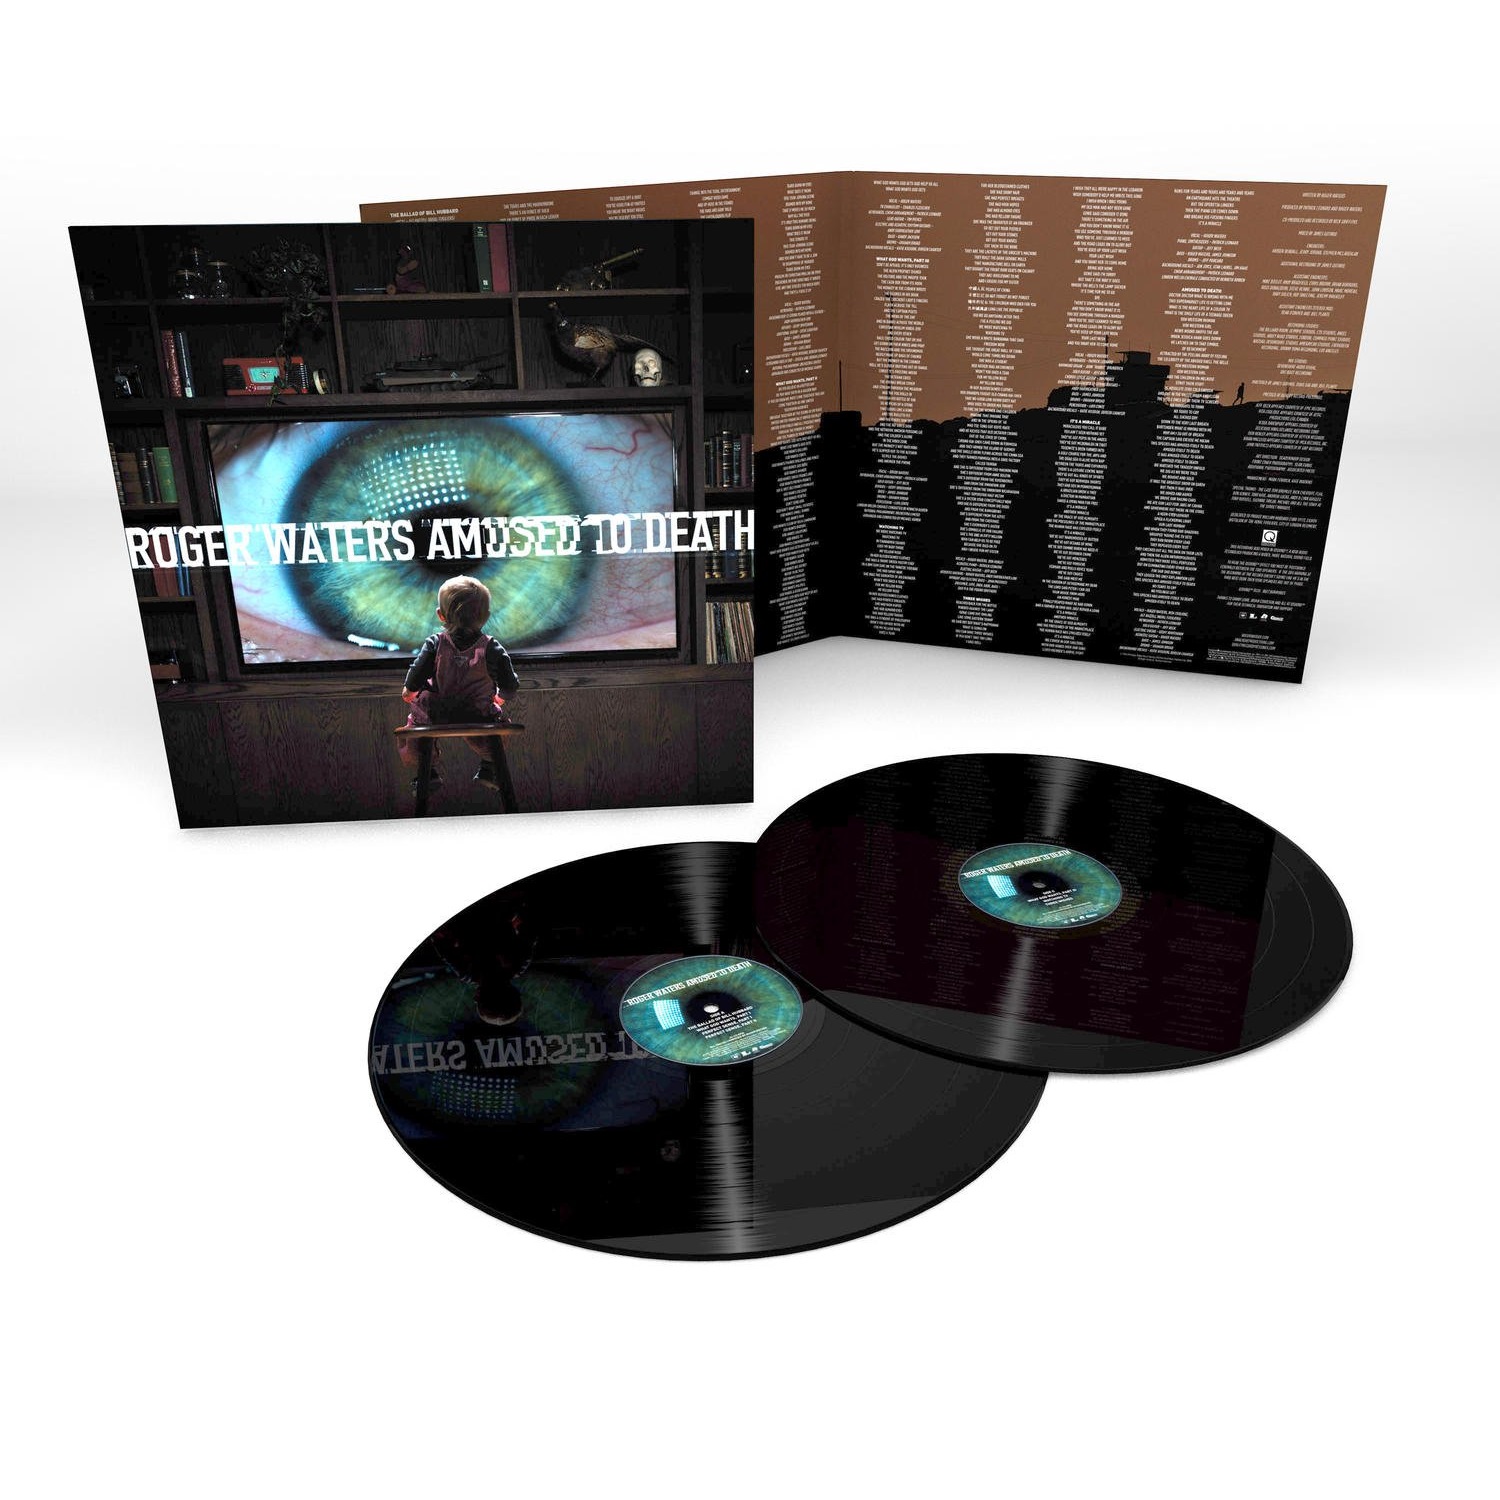 Roger Waters (로저 워터스) - 3집 Amused To Death [2LP] 